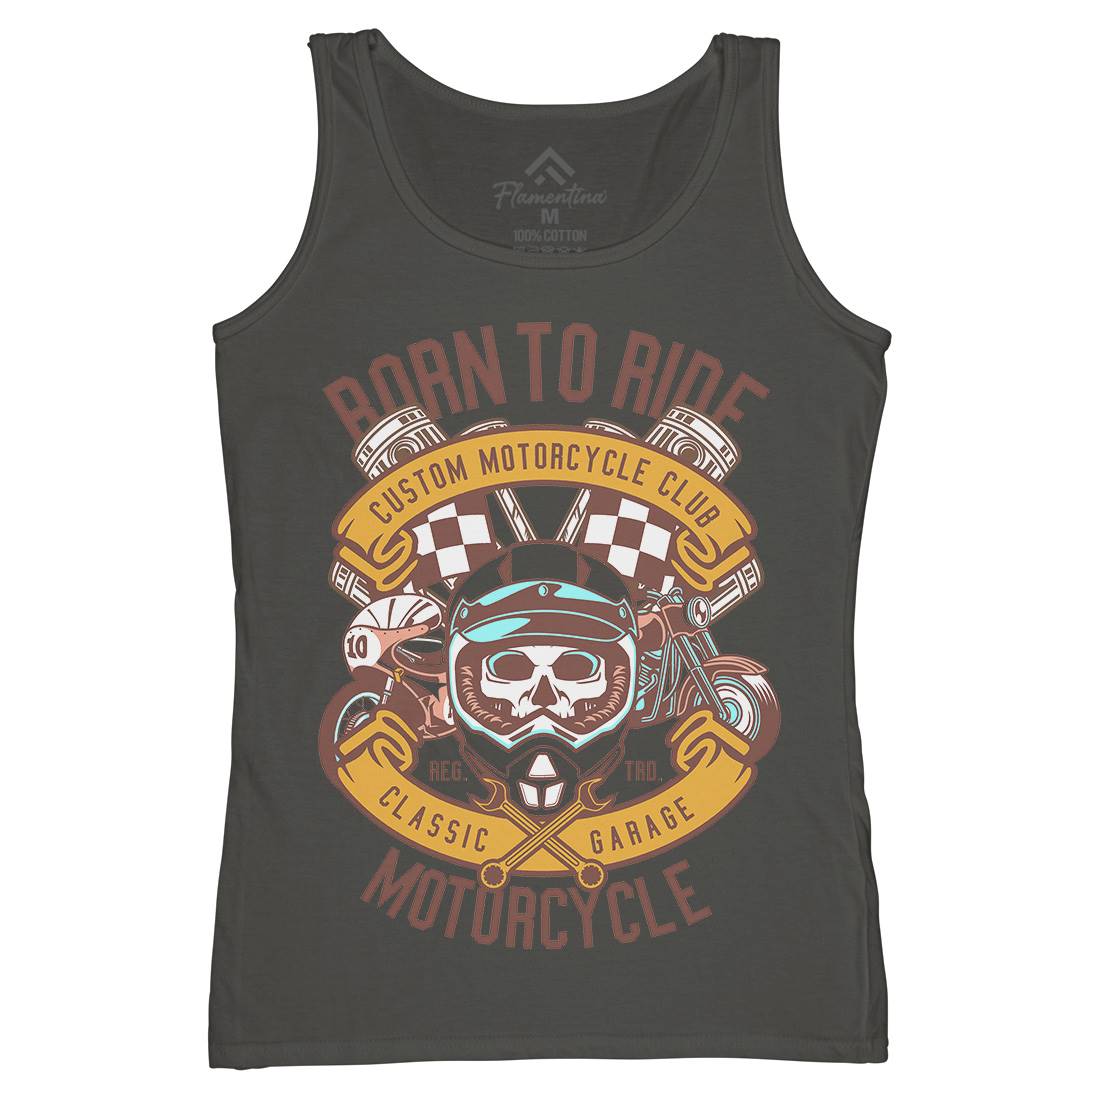 Born To Ride Womens Organic Tank Top Vest Motorcycles D509